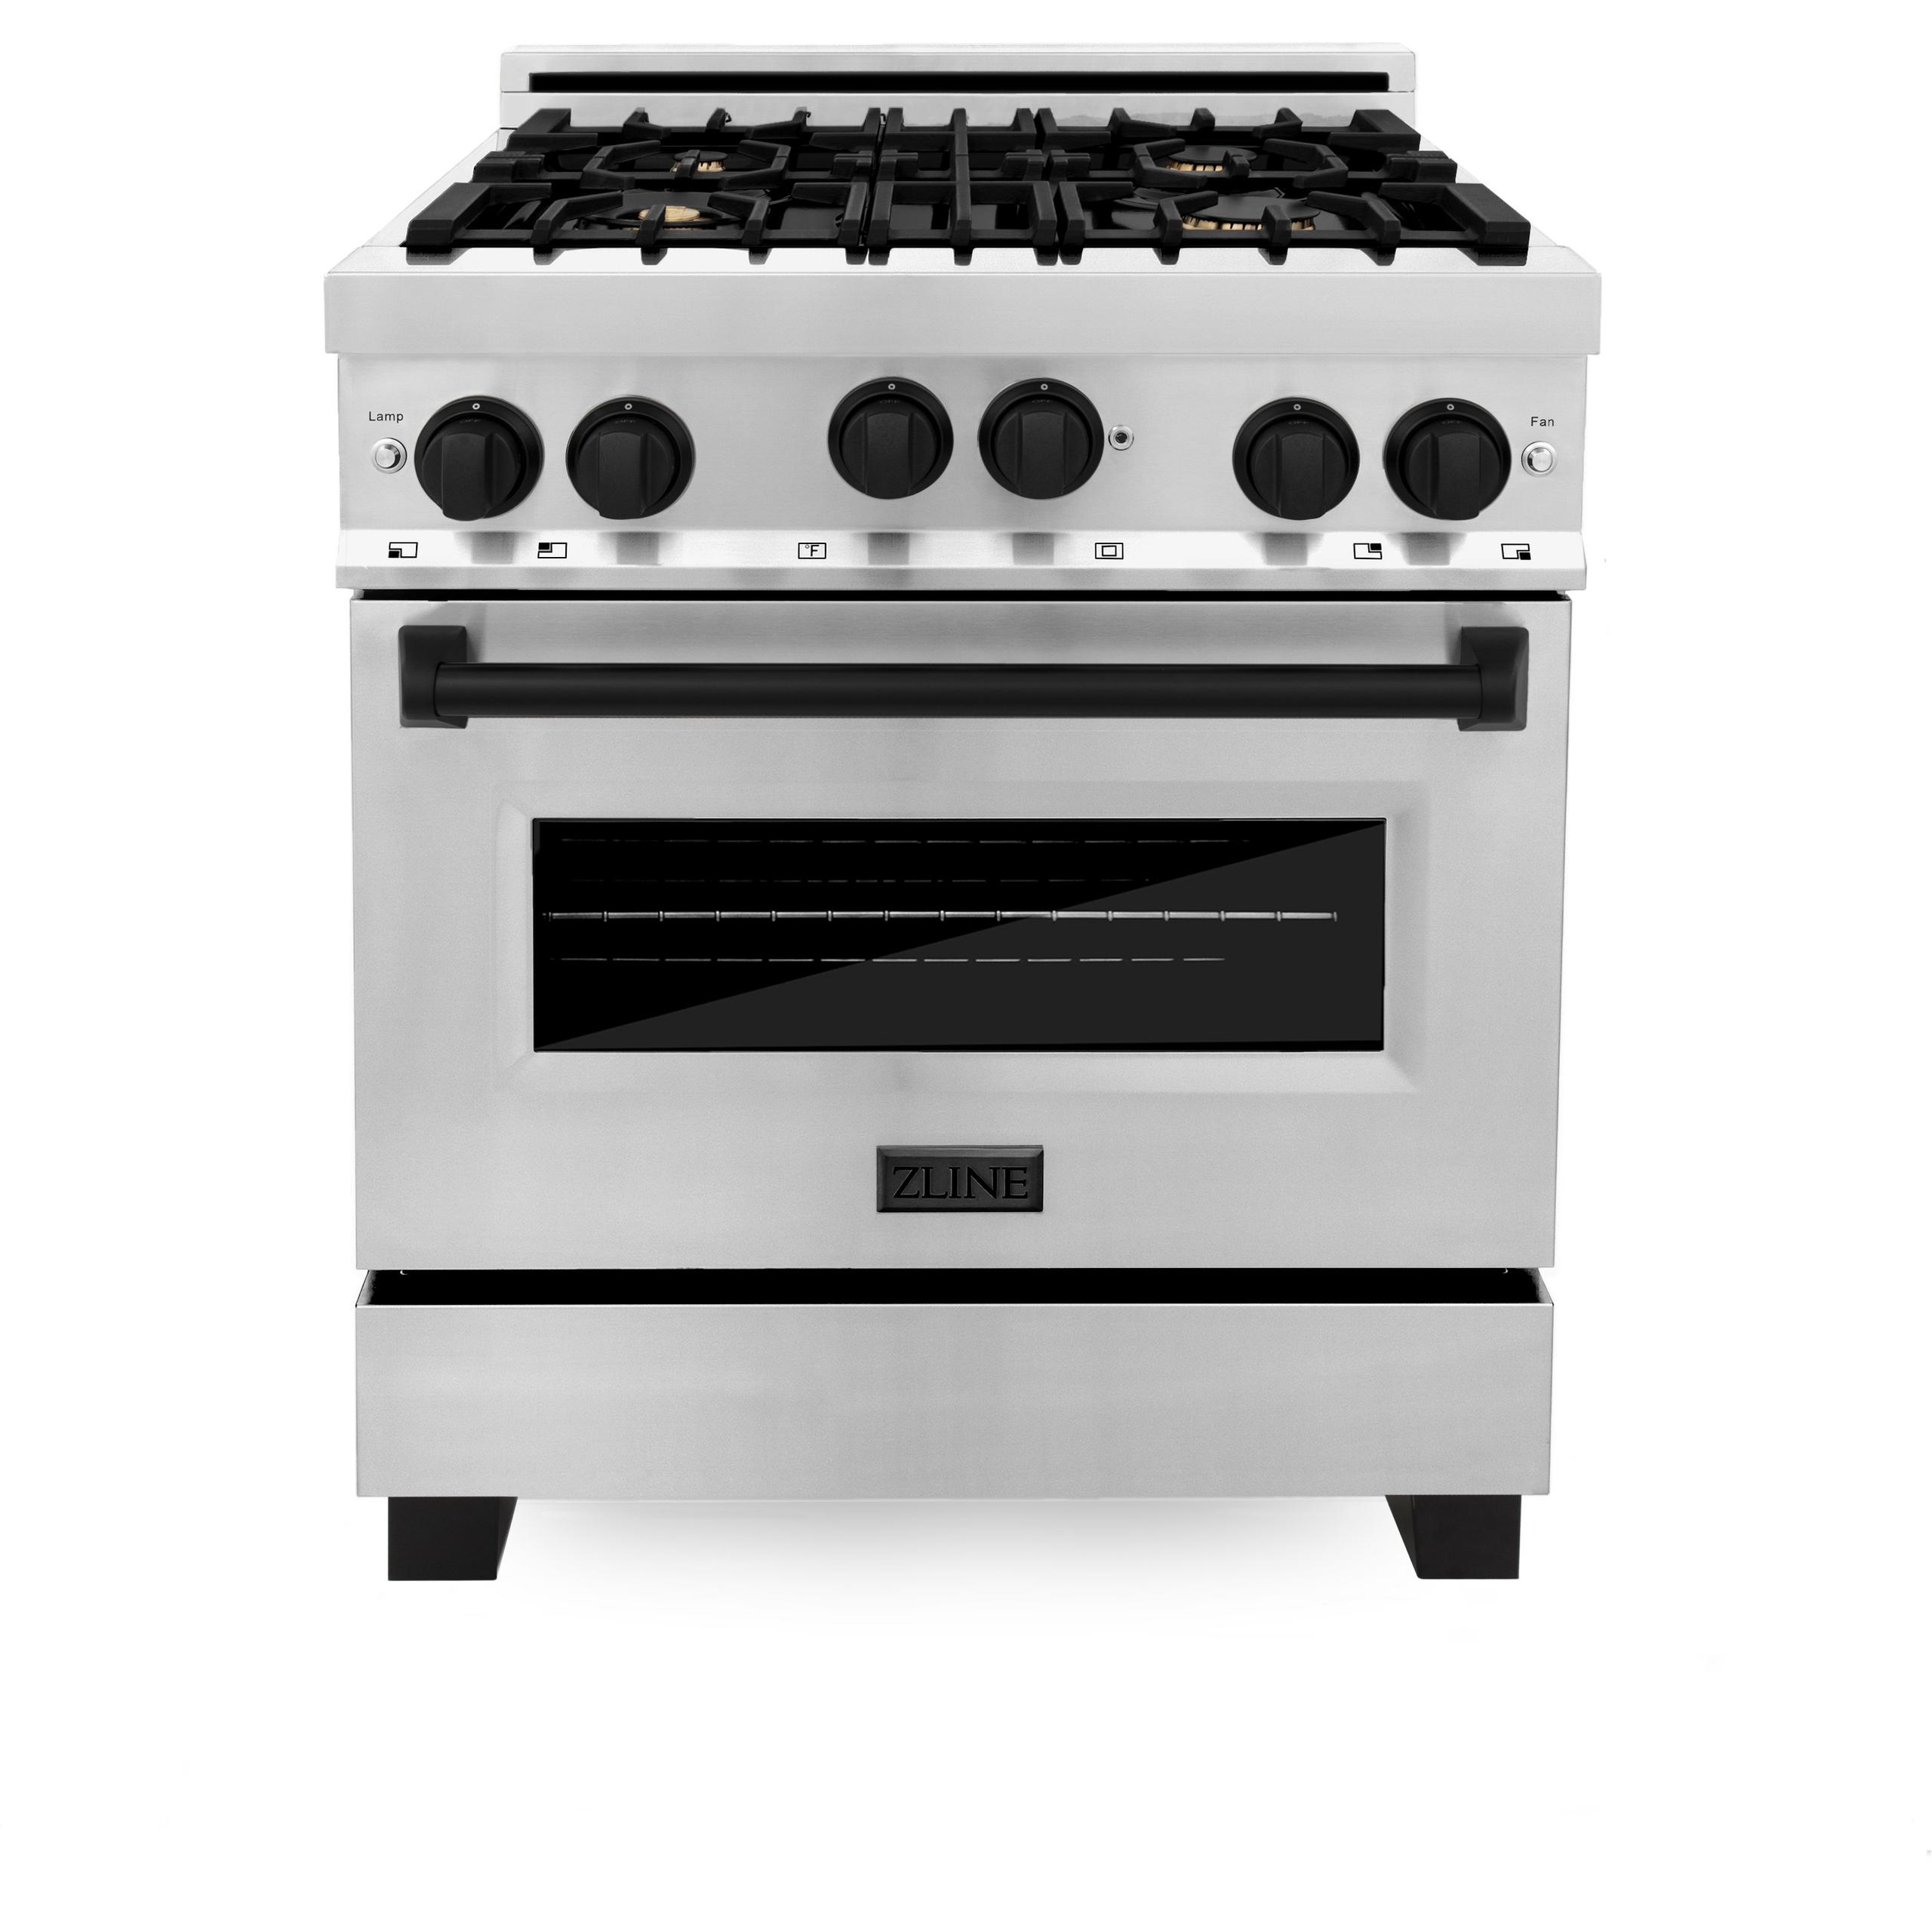 ZLINE KITCHEN AND BATH RGZ30G ZLINE Autograph Edition 30" 4.0 cu. ft. Range with Gas Stove and Gas Oven in Stainless Steel with Accents Color: Gold